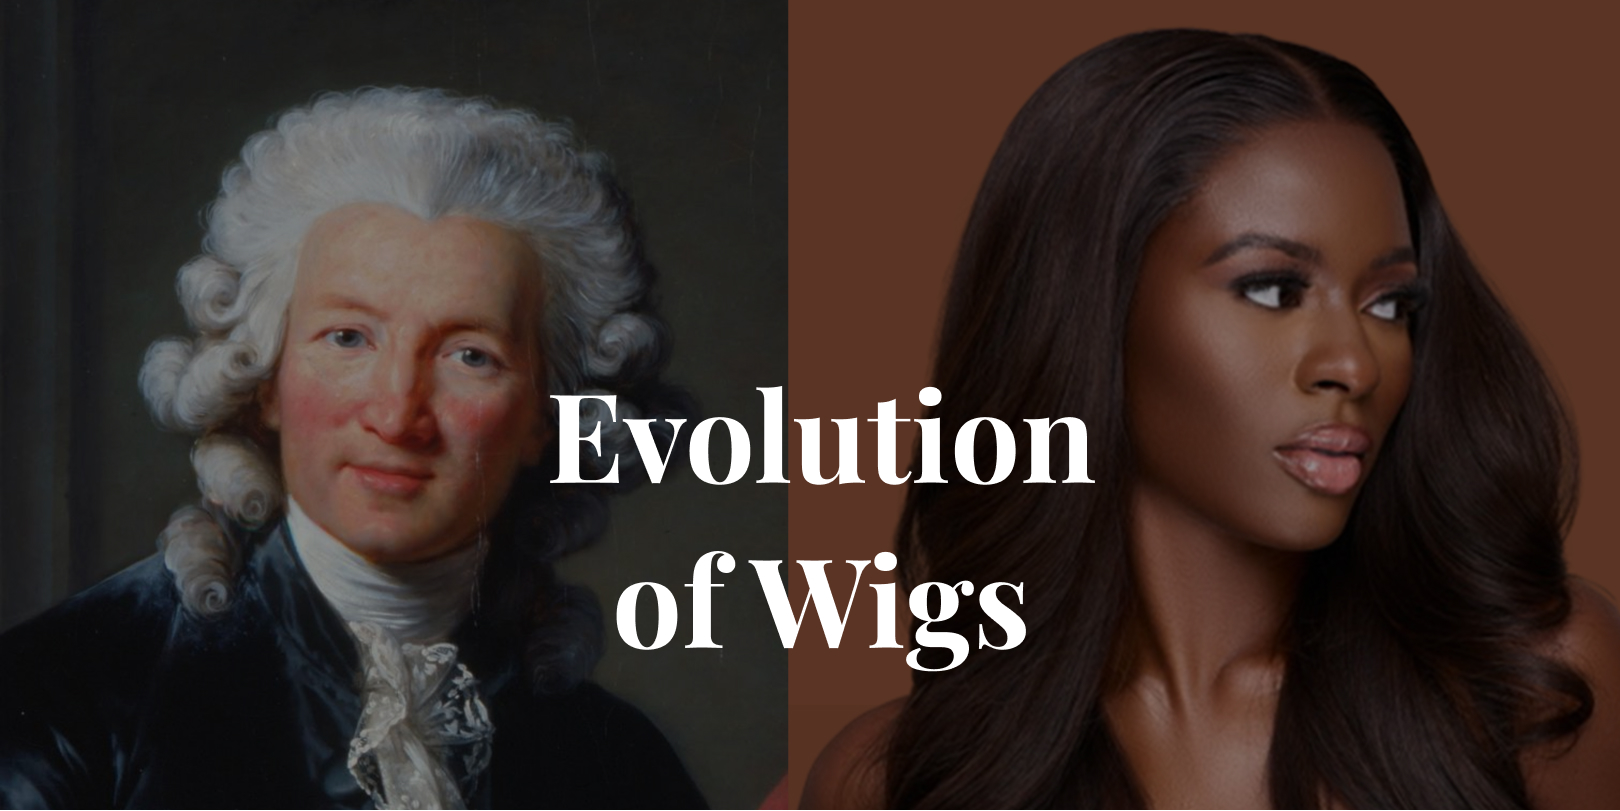 History of Wigs - Who Invented Wigs?